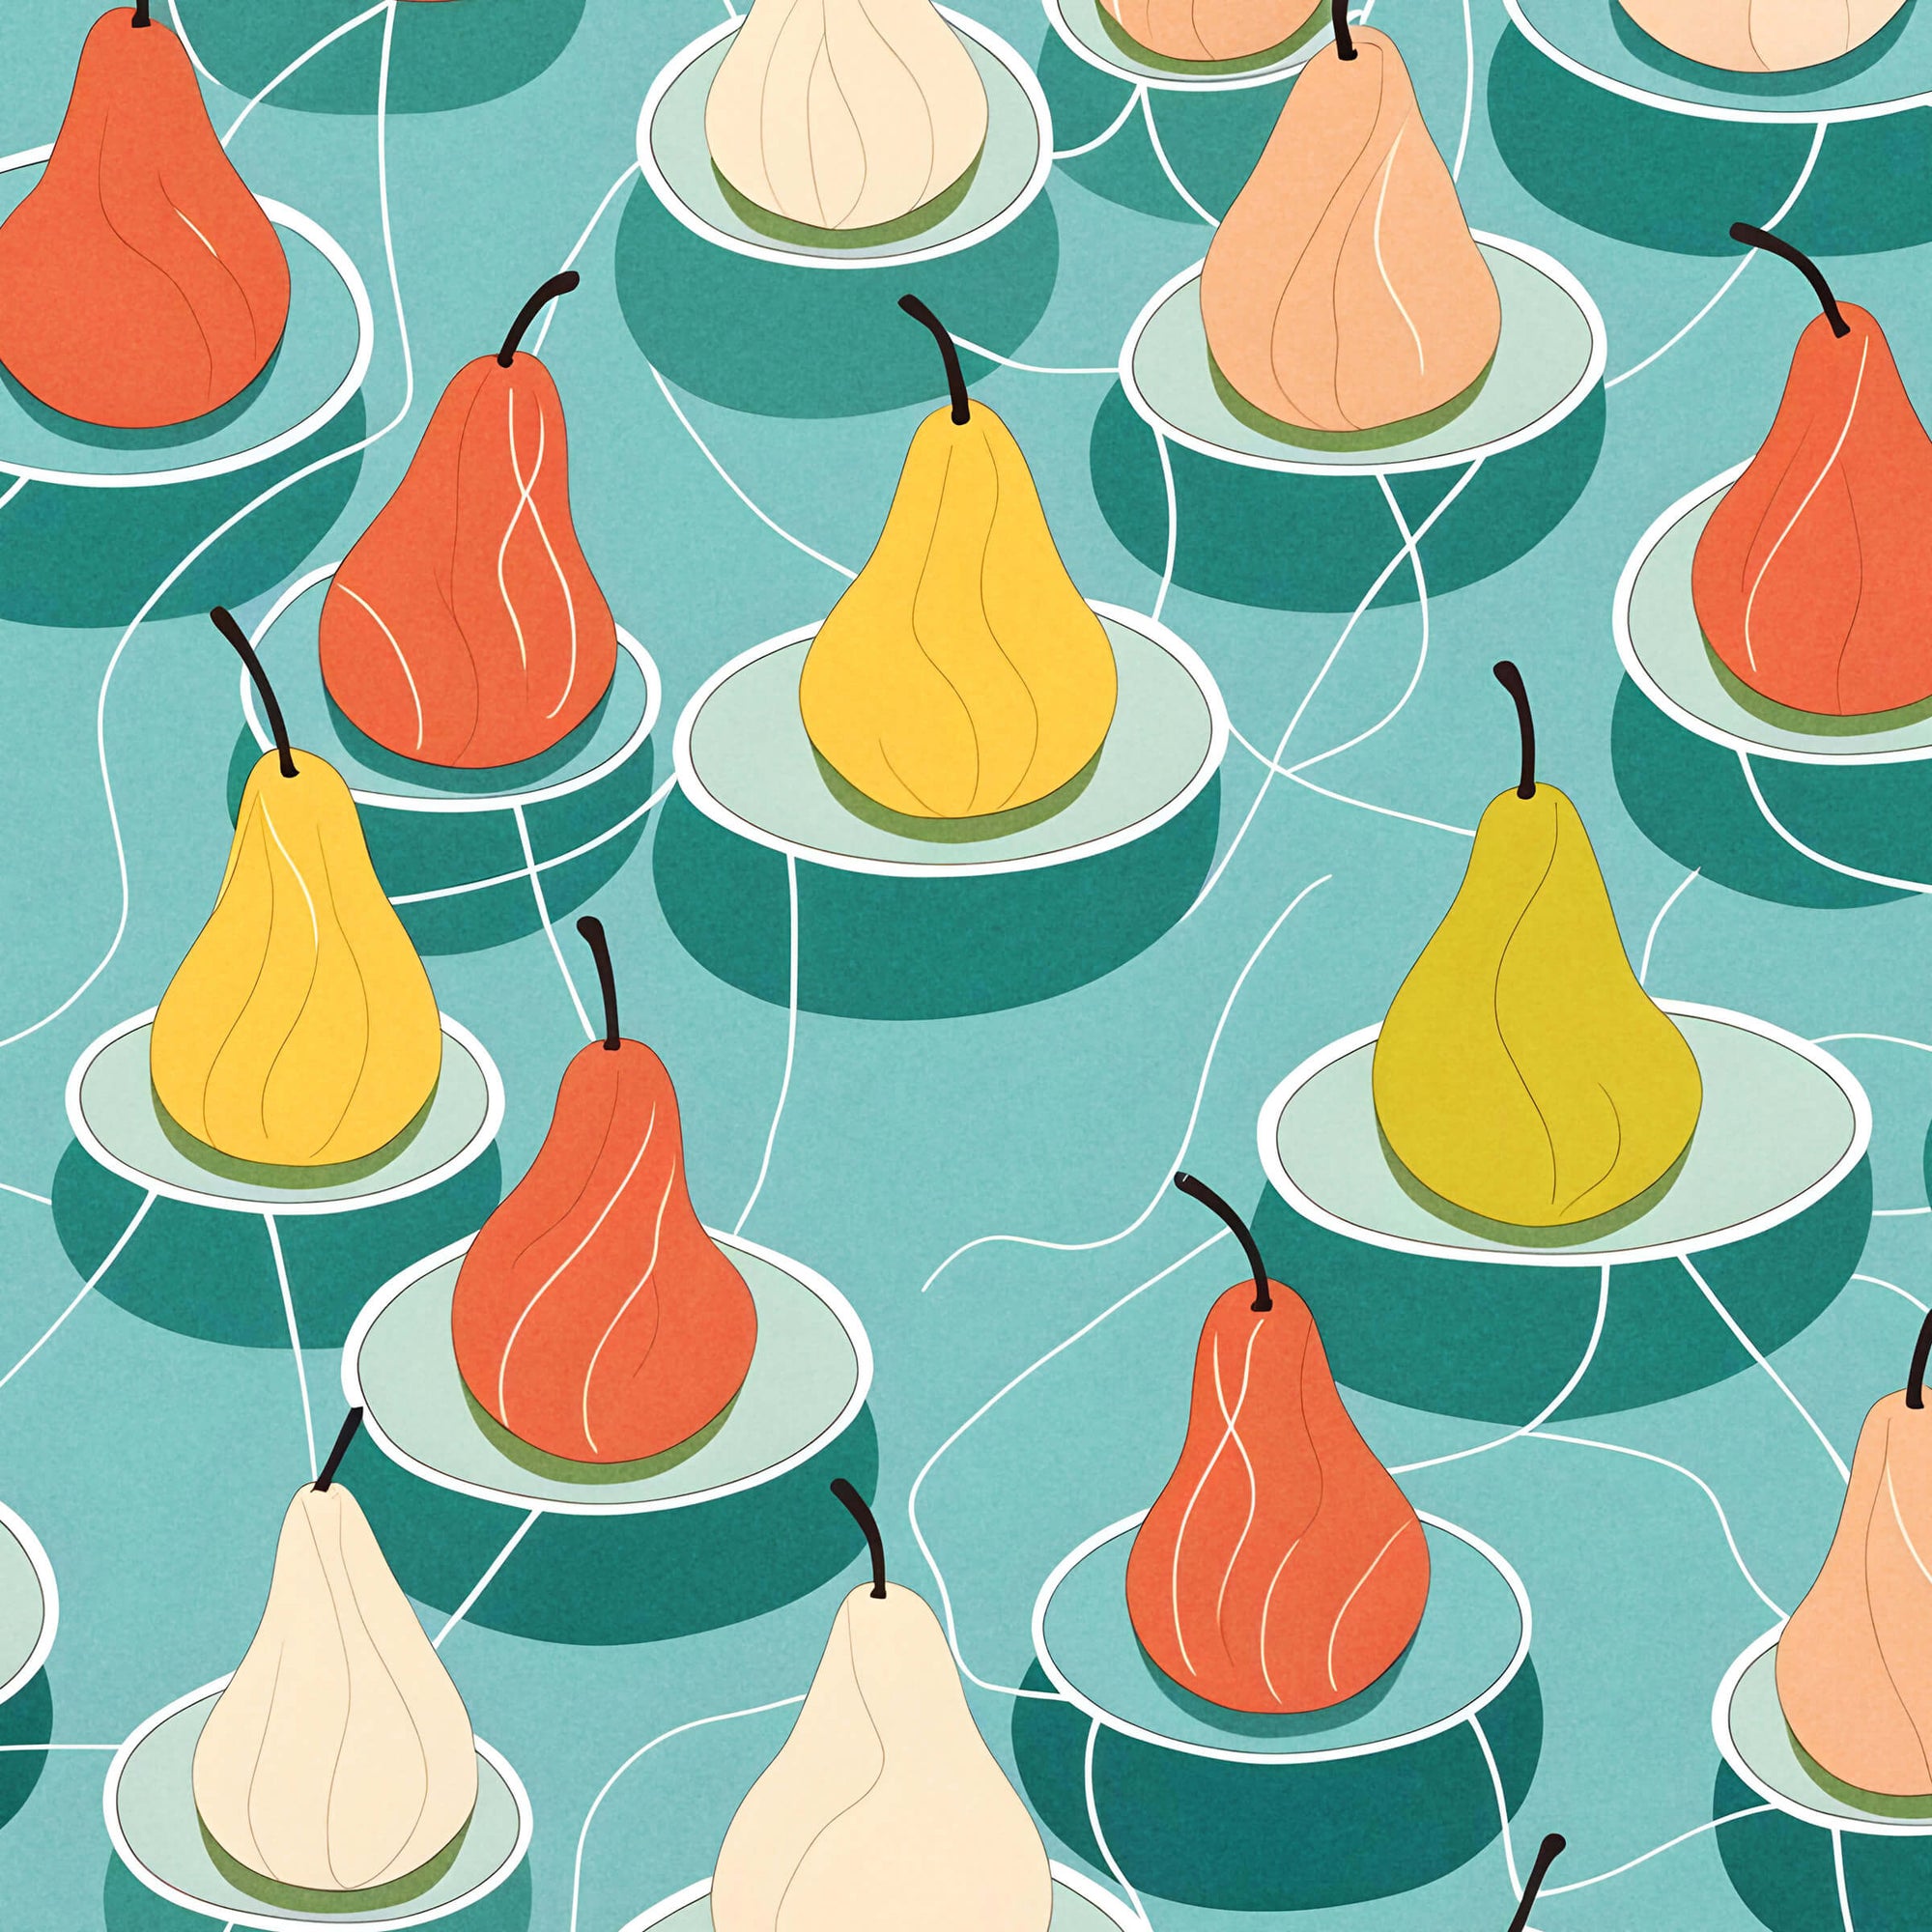 Juicy Pear Illustration - Fun Facts About Pears